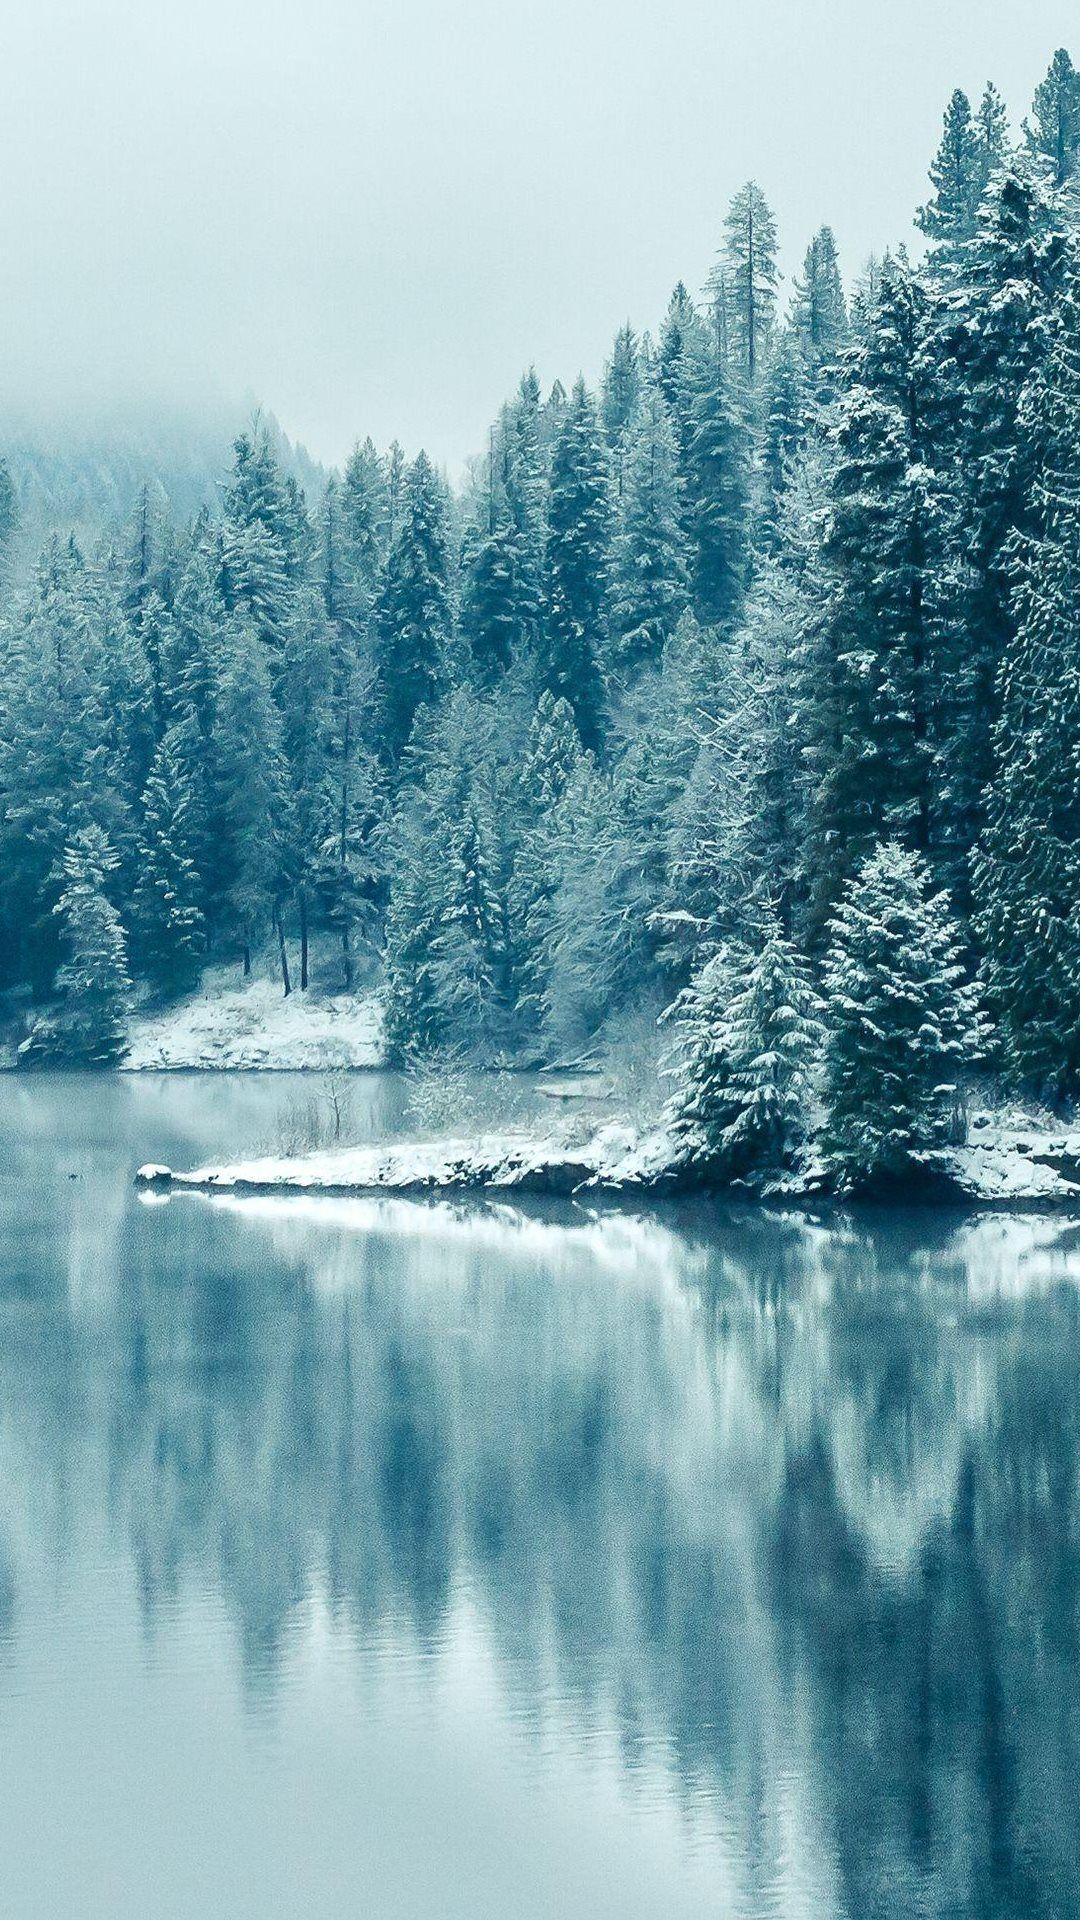 Turquoise Pine Forest Lake Snow. Winter wallpaper